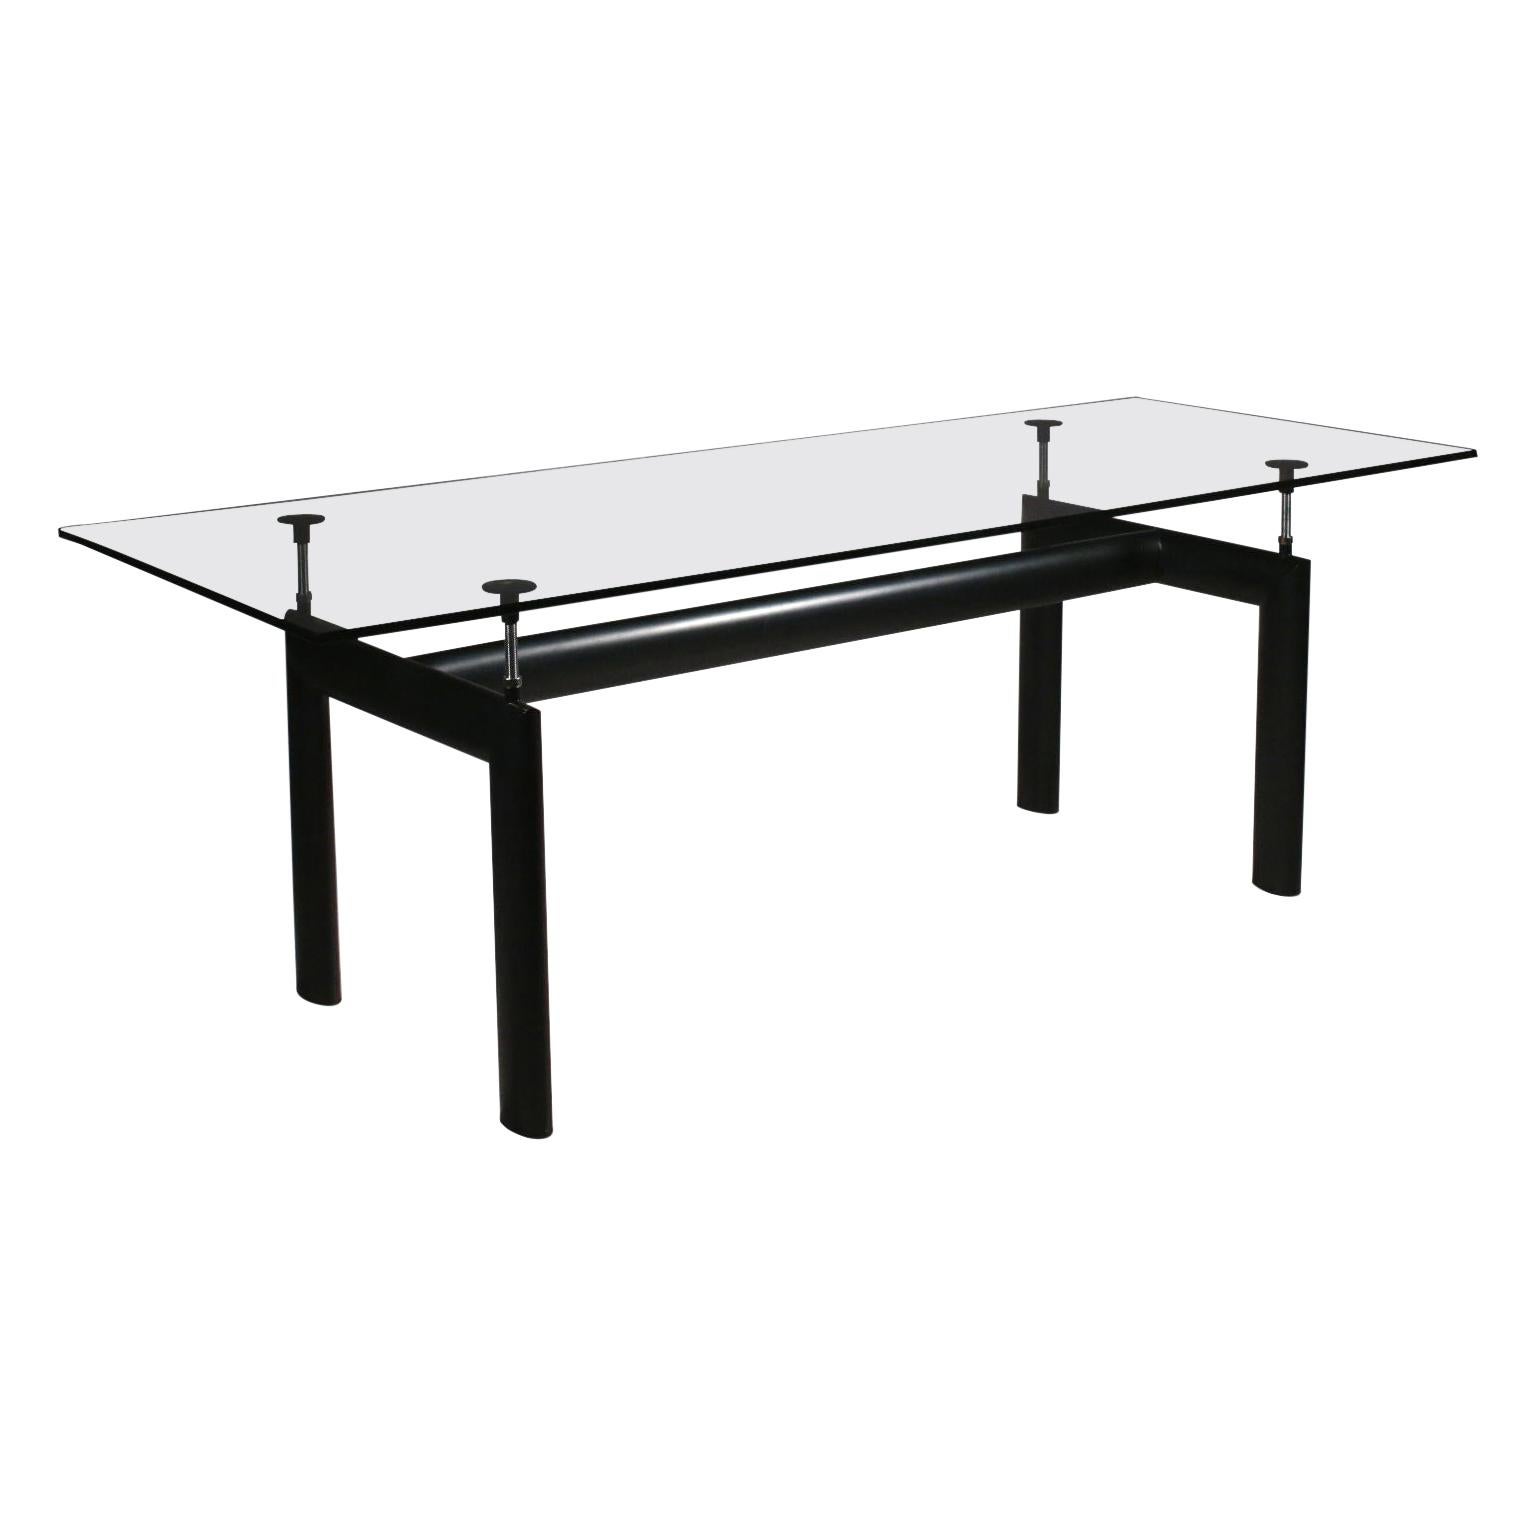 Table, Lacquered Metal and Crystal, Italy 1974 Le Corbusier, Cassina